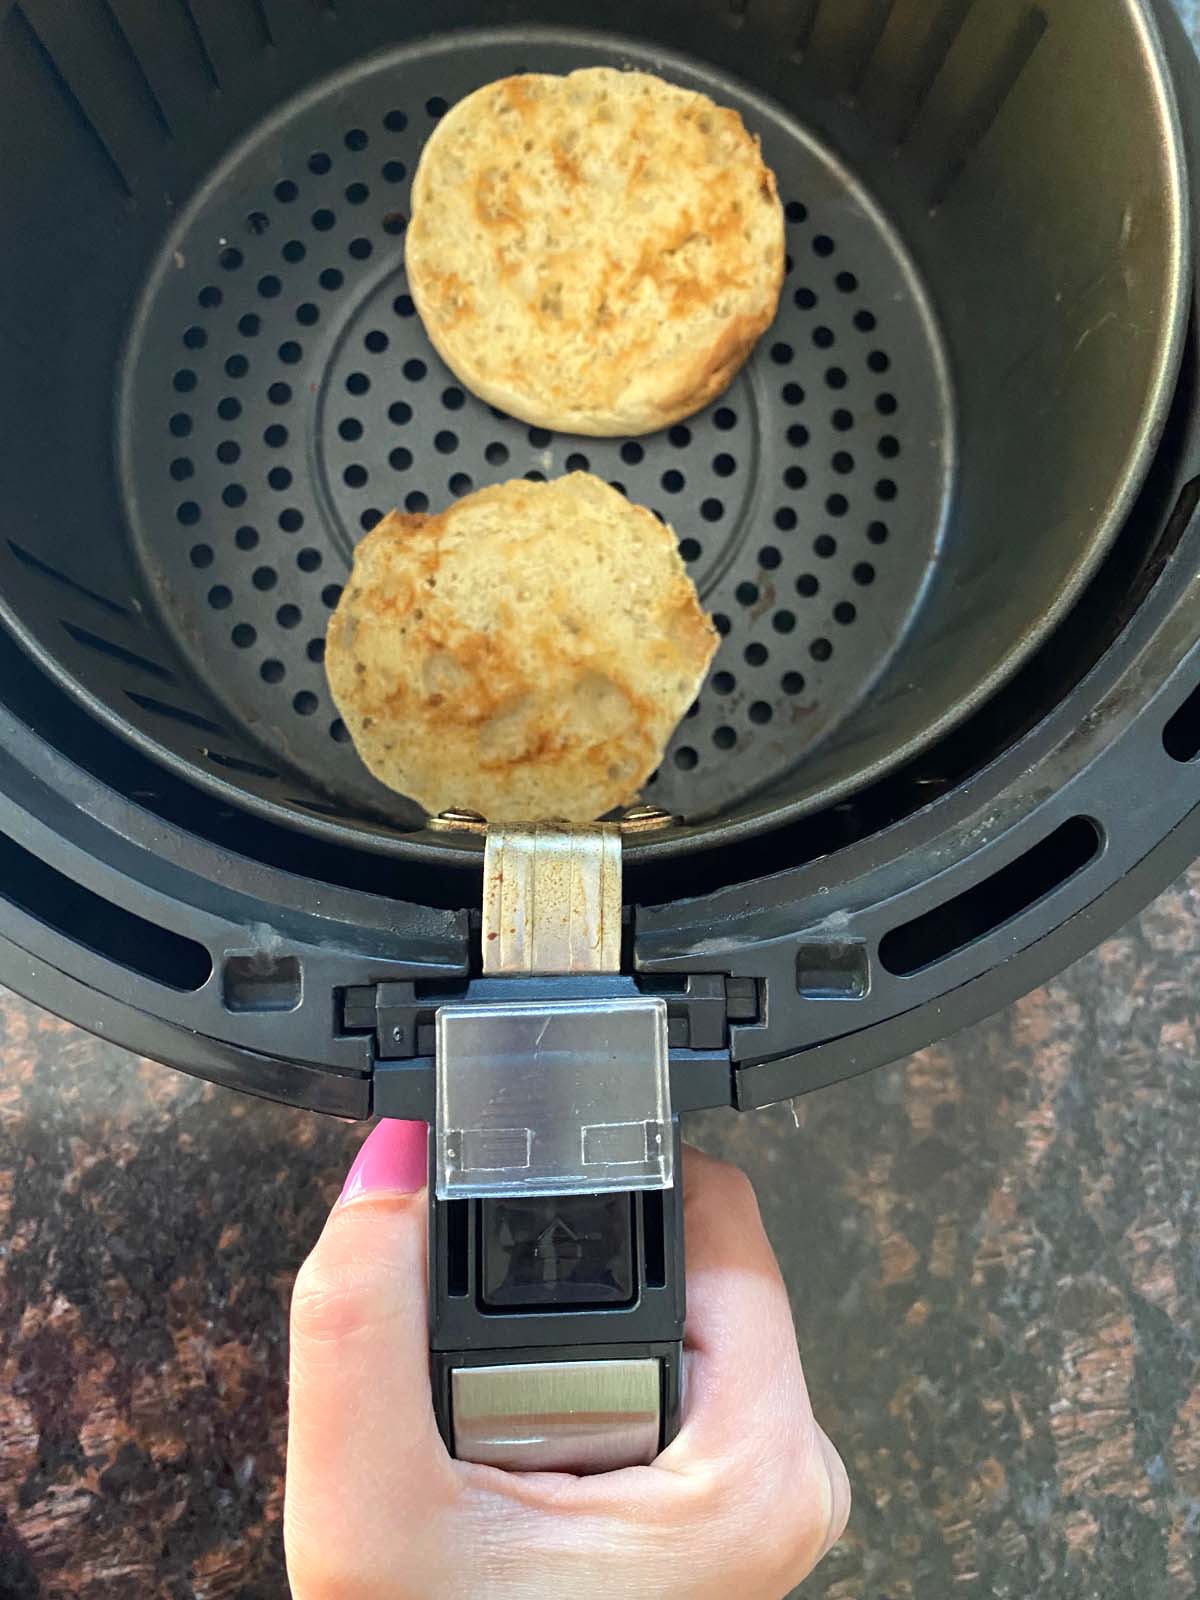 Toasted english muffin in the air fryer.